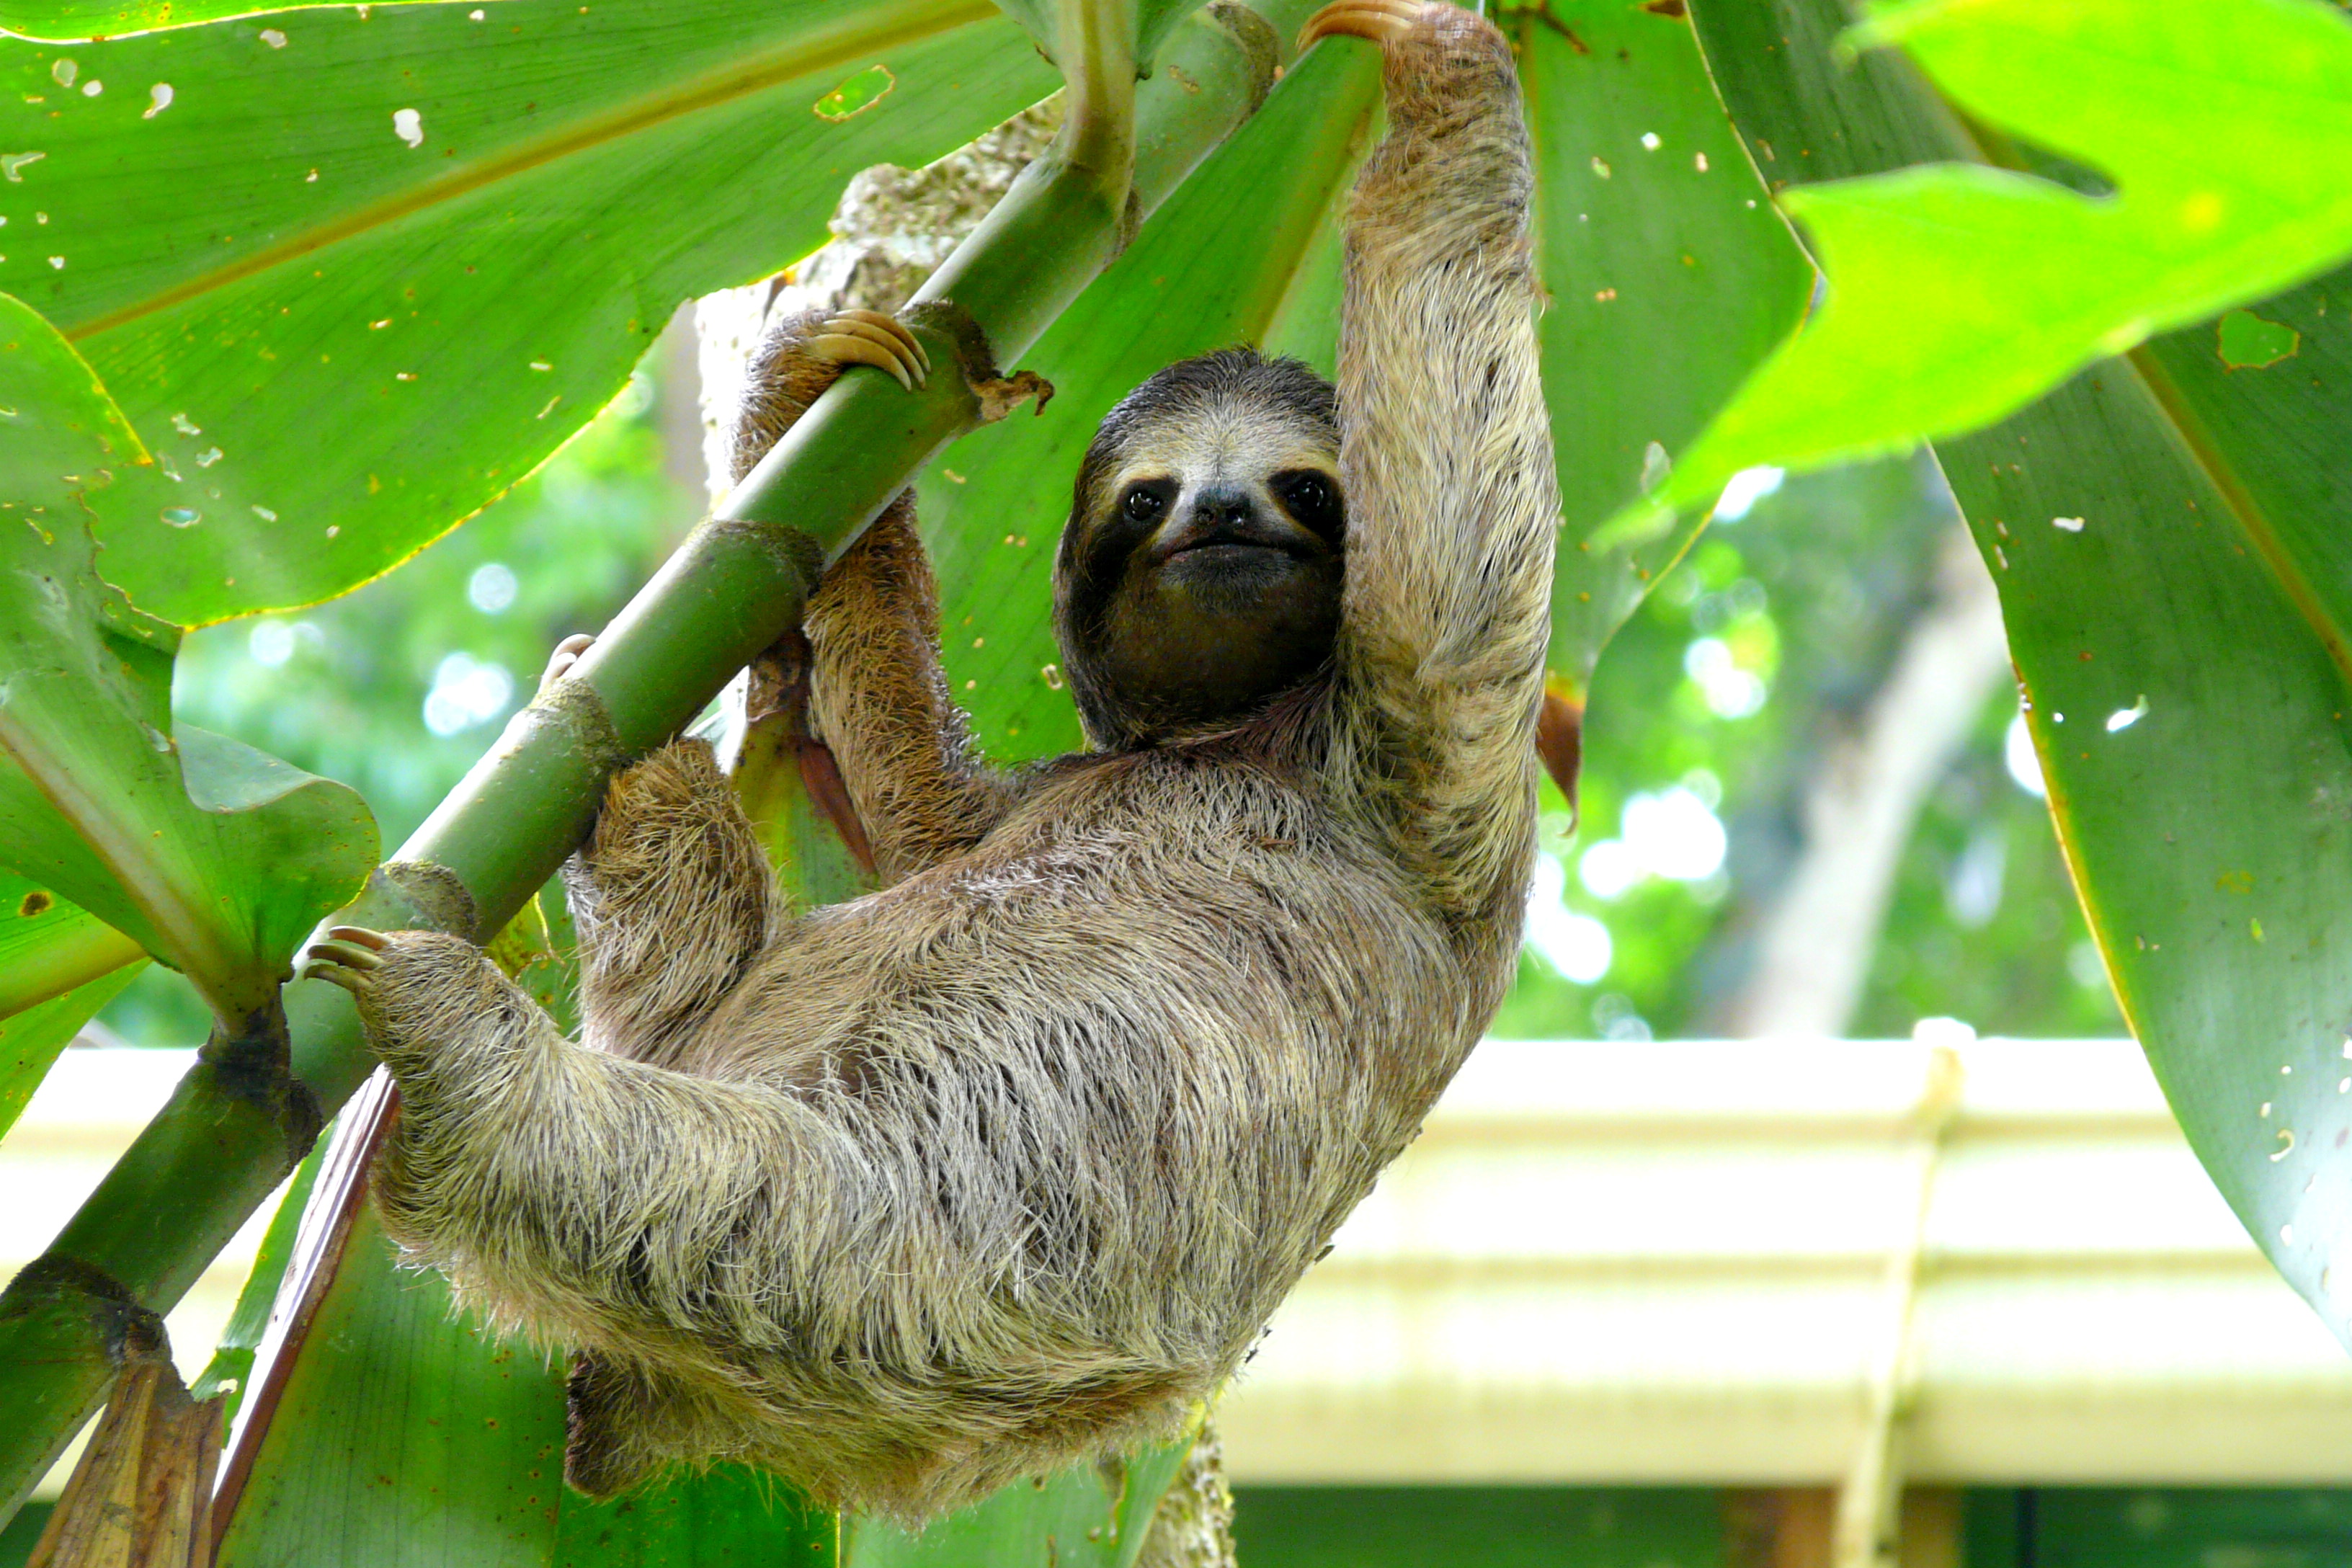 10 Days Experiencing the Beauty of Costa Rica with Your Family - Sloth in Costa Rica